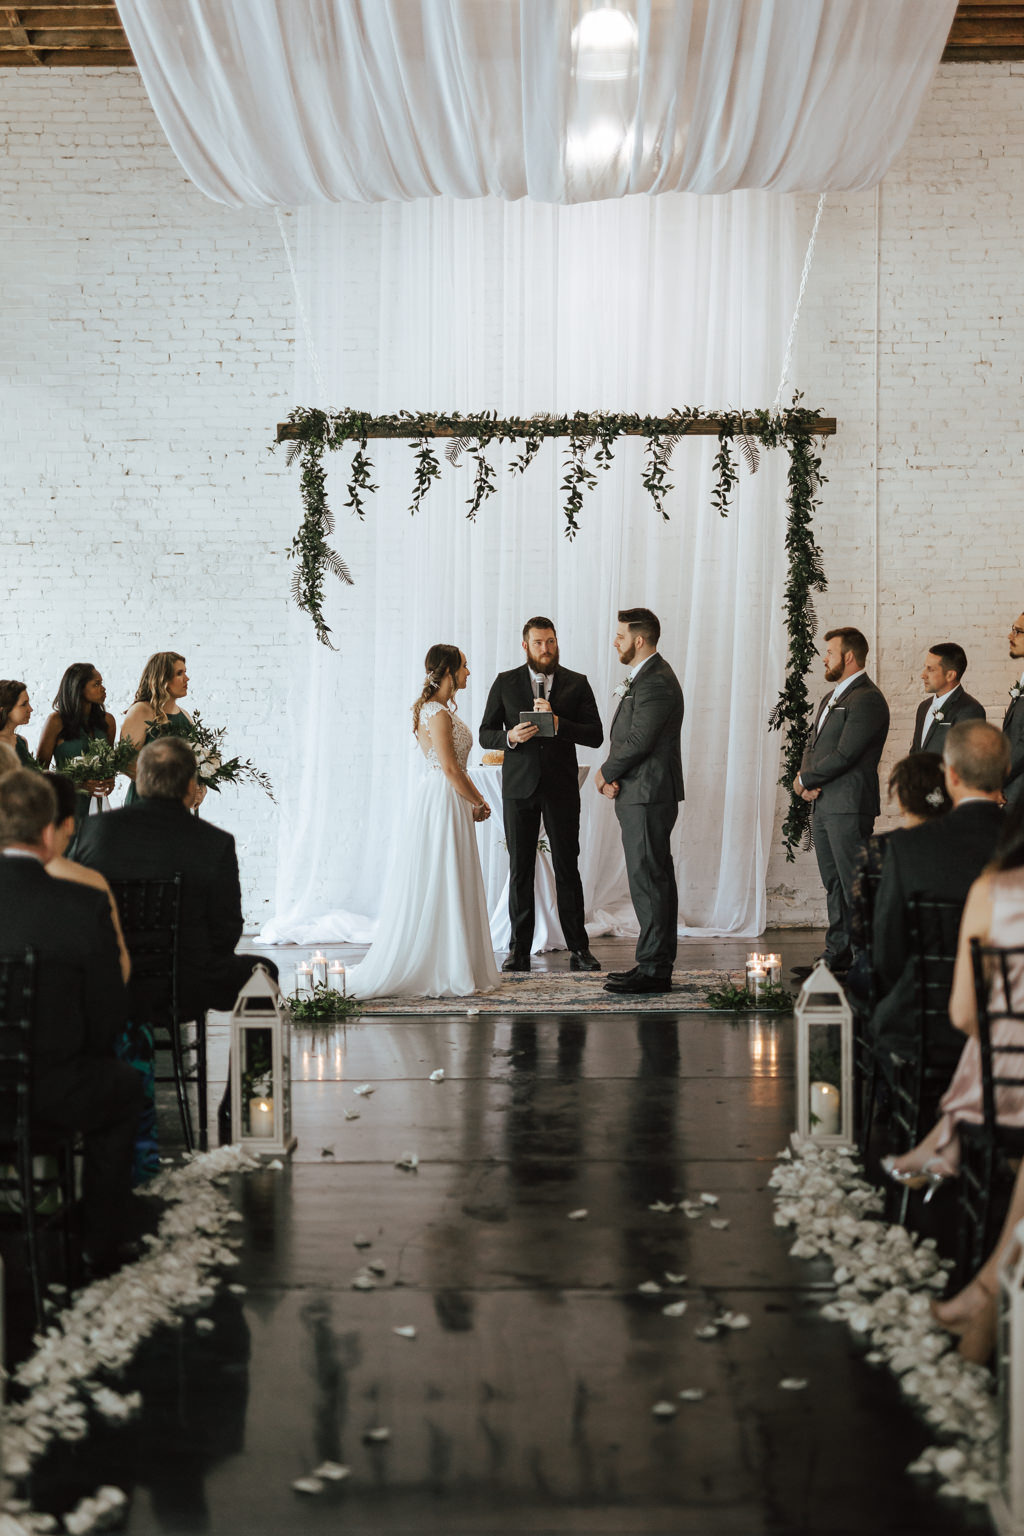 Romantic Wedding Ceremony Decor, Bride and Groom Exchanging Vows Under Greenery Arch and White Draping Wedding Portrait | Lakeland Industrial Wedding Venue HAUS 820